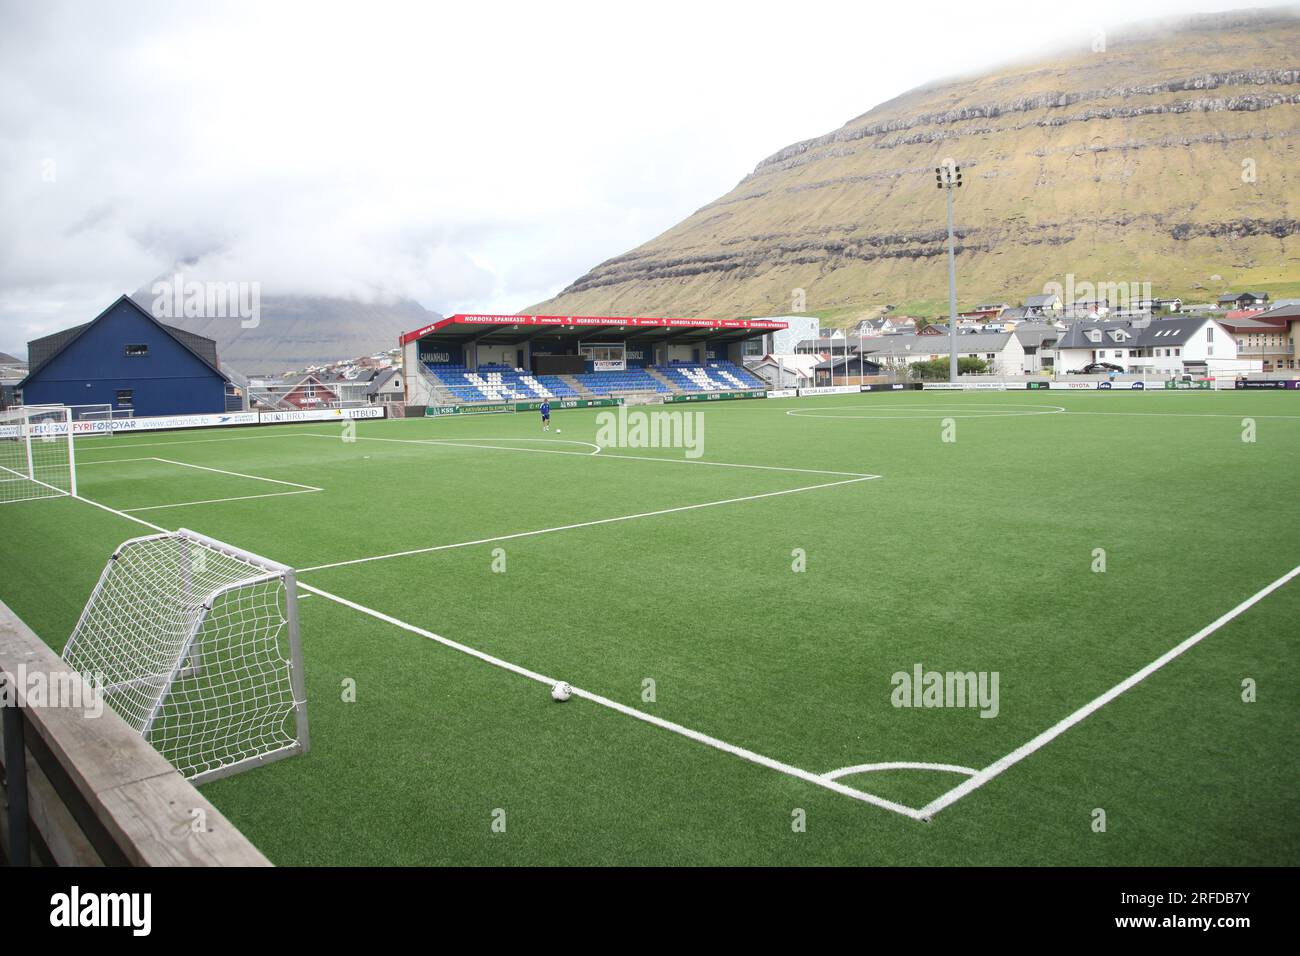 05 June 2021, Faroe Islands, Klaksvík: A person plays soccer in Djupumyra stadium. KÍ Klaksvik made Faroese soccer history on Wednesday night. The Faroe Islands champions advanced to the 3rd qualifying round of the Champions League by beating Swedish champions BK Häcken 4-3 in a penalty shootout and are now assured of at least a place in the group stage of the Conference League. This is the first time a Faroese team has participated in the group stage of a major European club competition. In addition, KÍ Klaksvik is the first men's team in the final round of the European Cup in 30 years. Photo Stock Photo